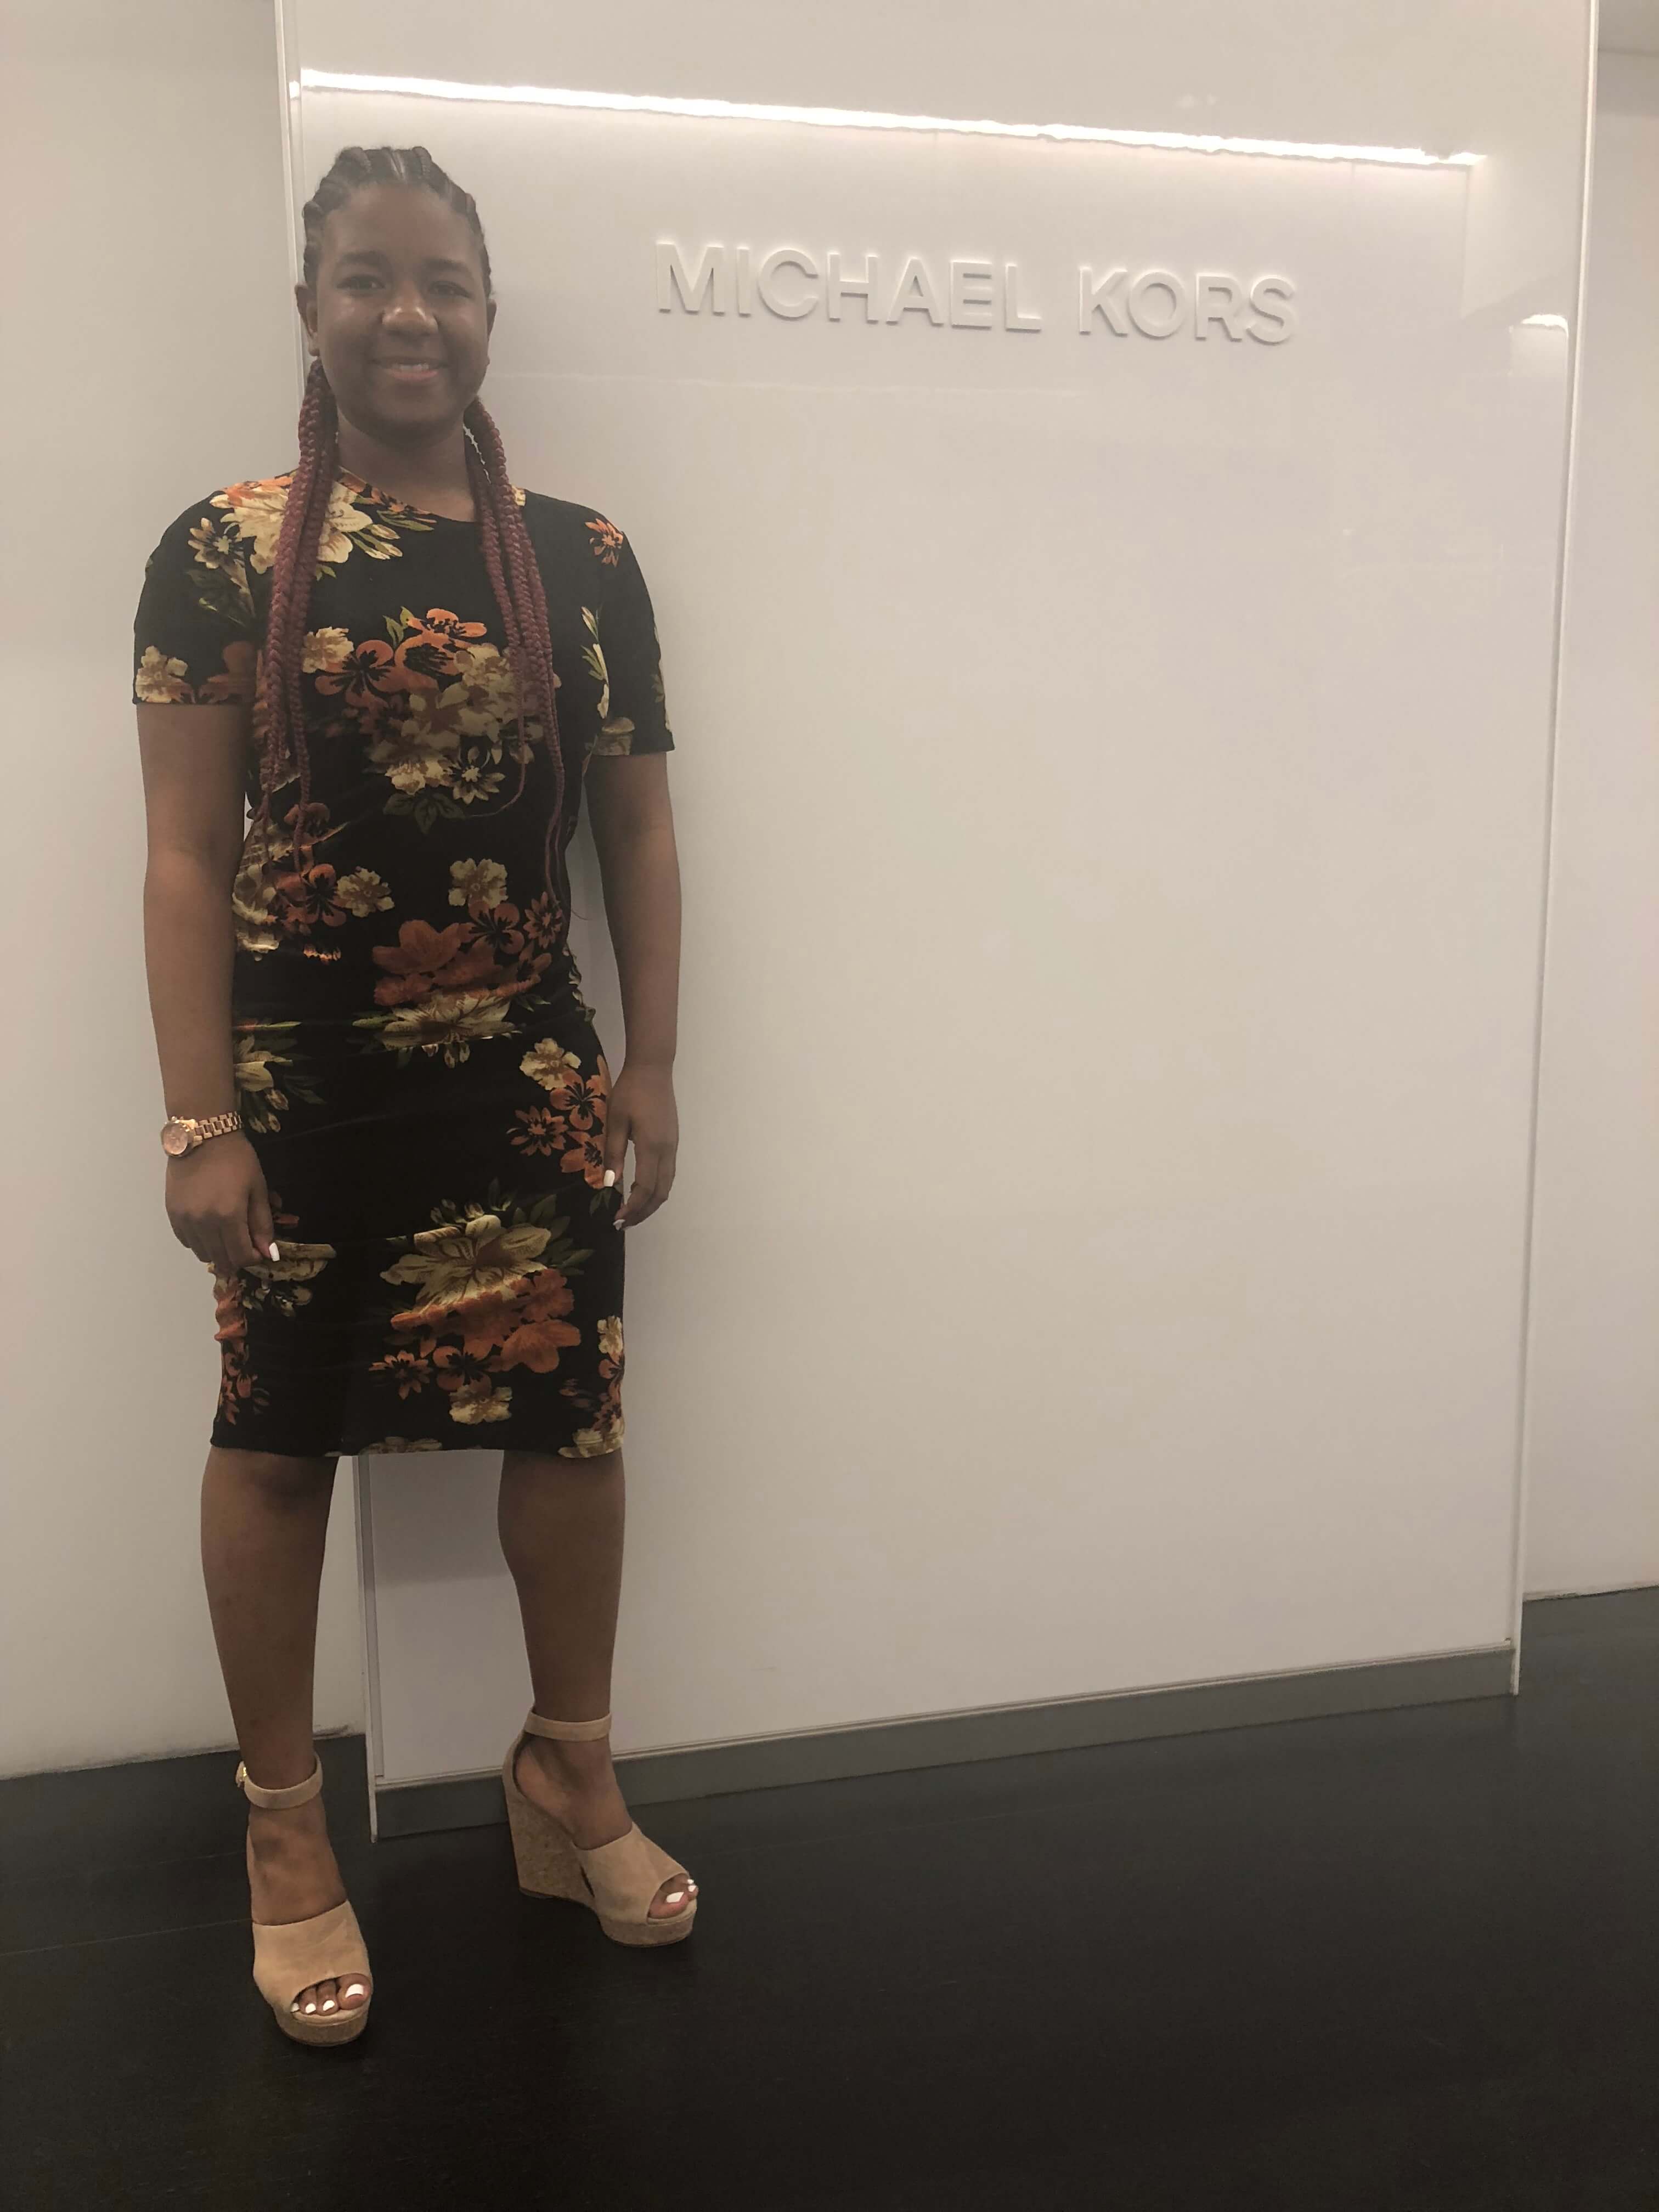 Picture of me at Michael Kors HQ wearing an all black dress with yellow and orange flowers.